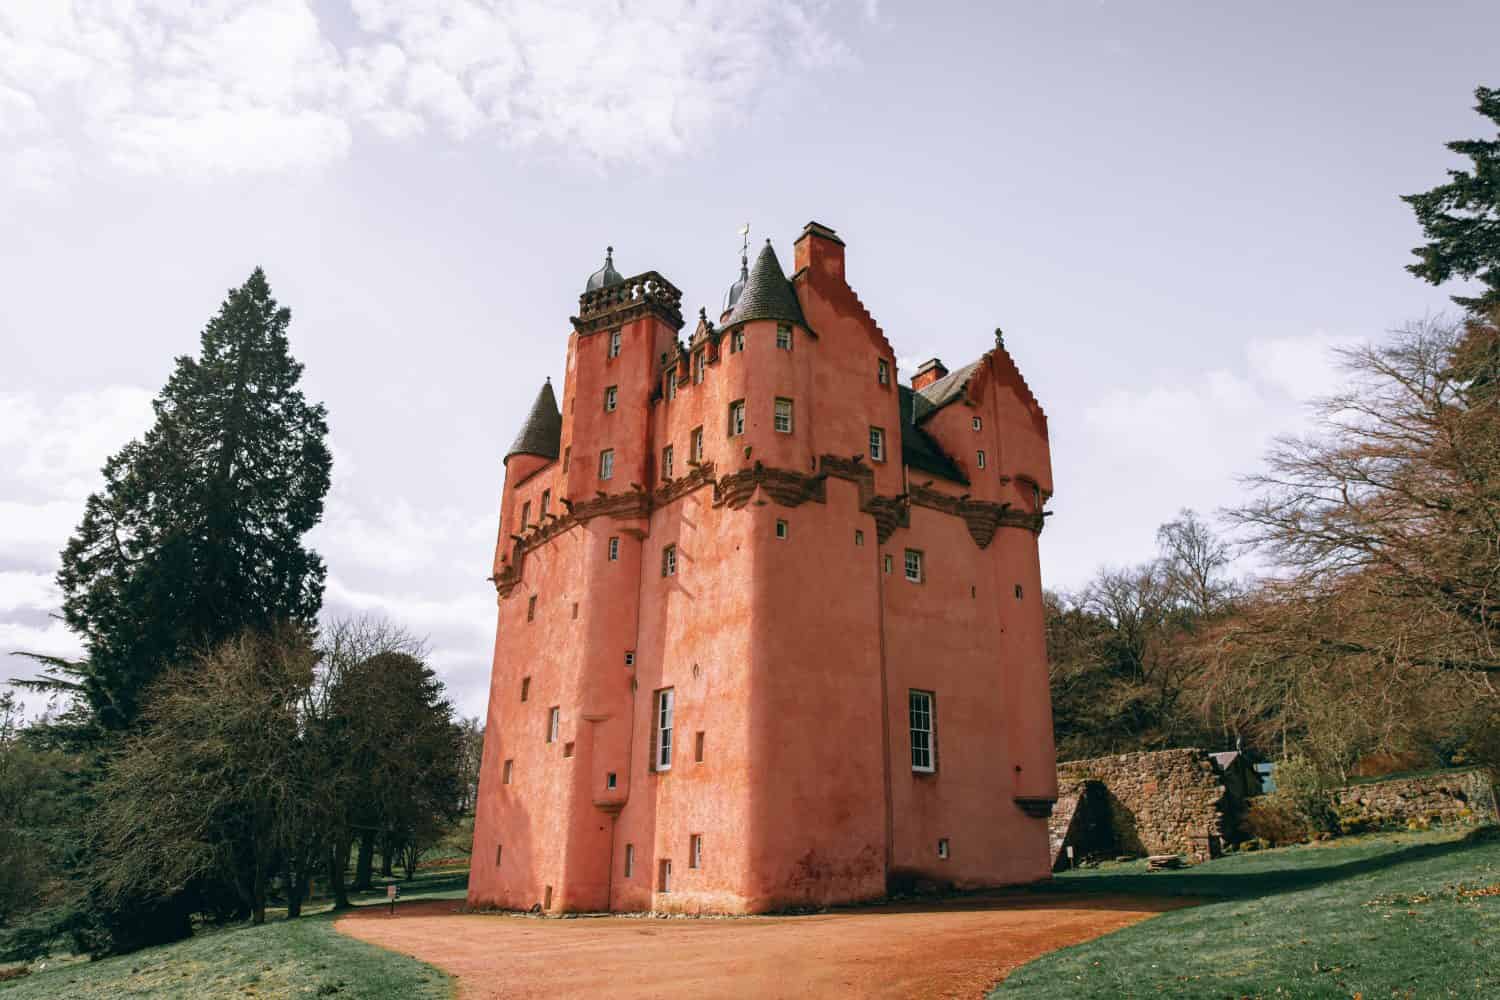 Craigievar Castle, Scotland. Beautiful pink castle that inspired Disney’s Cinderella Castle. Scottish Baronial style from 1576, exterior unchanged 1626. Pink castle photographed at Golden Hour.